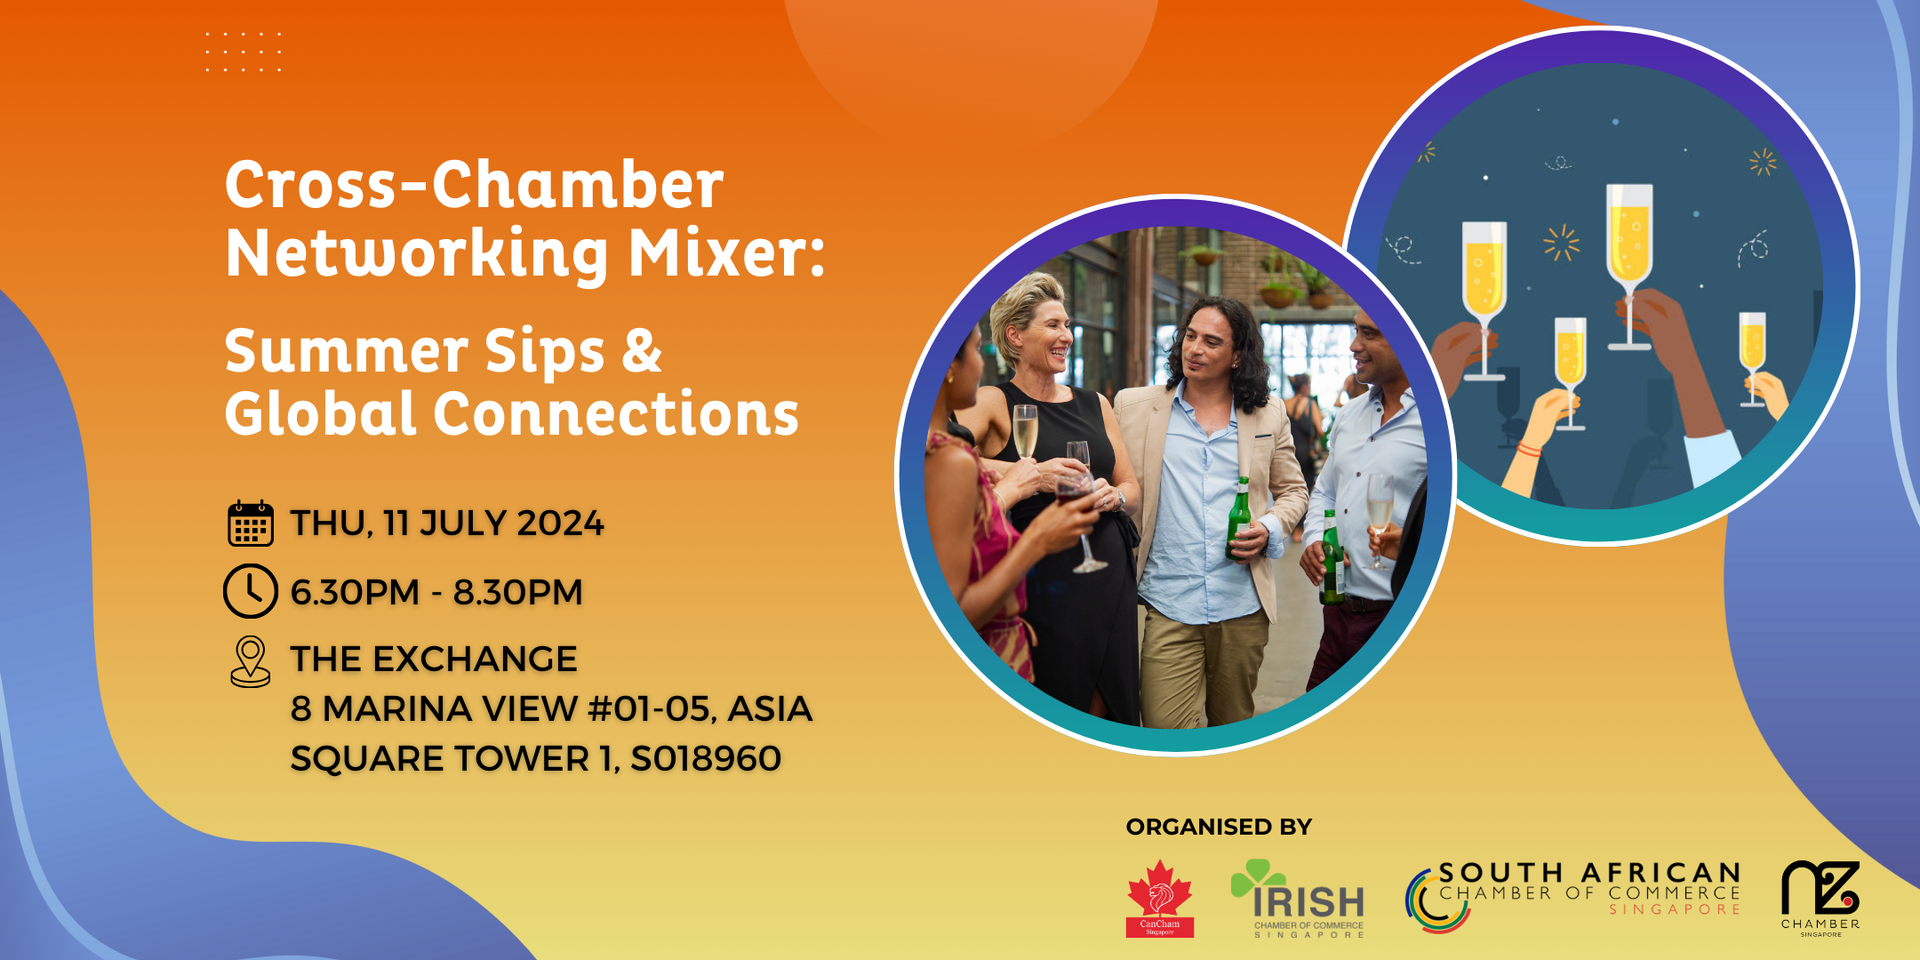 thumbnails Sold out - Cross-Chamber Networking Mixer: Summer Sips & Global Connections